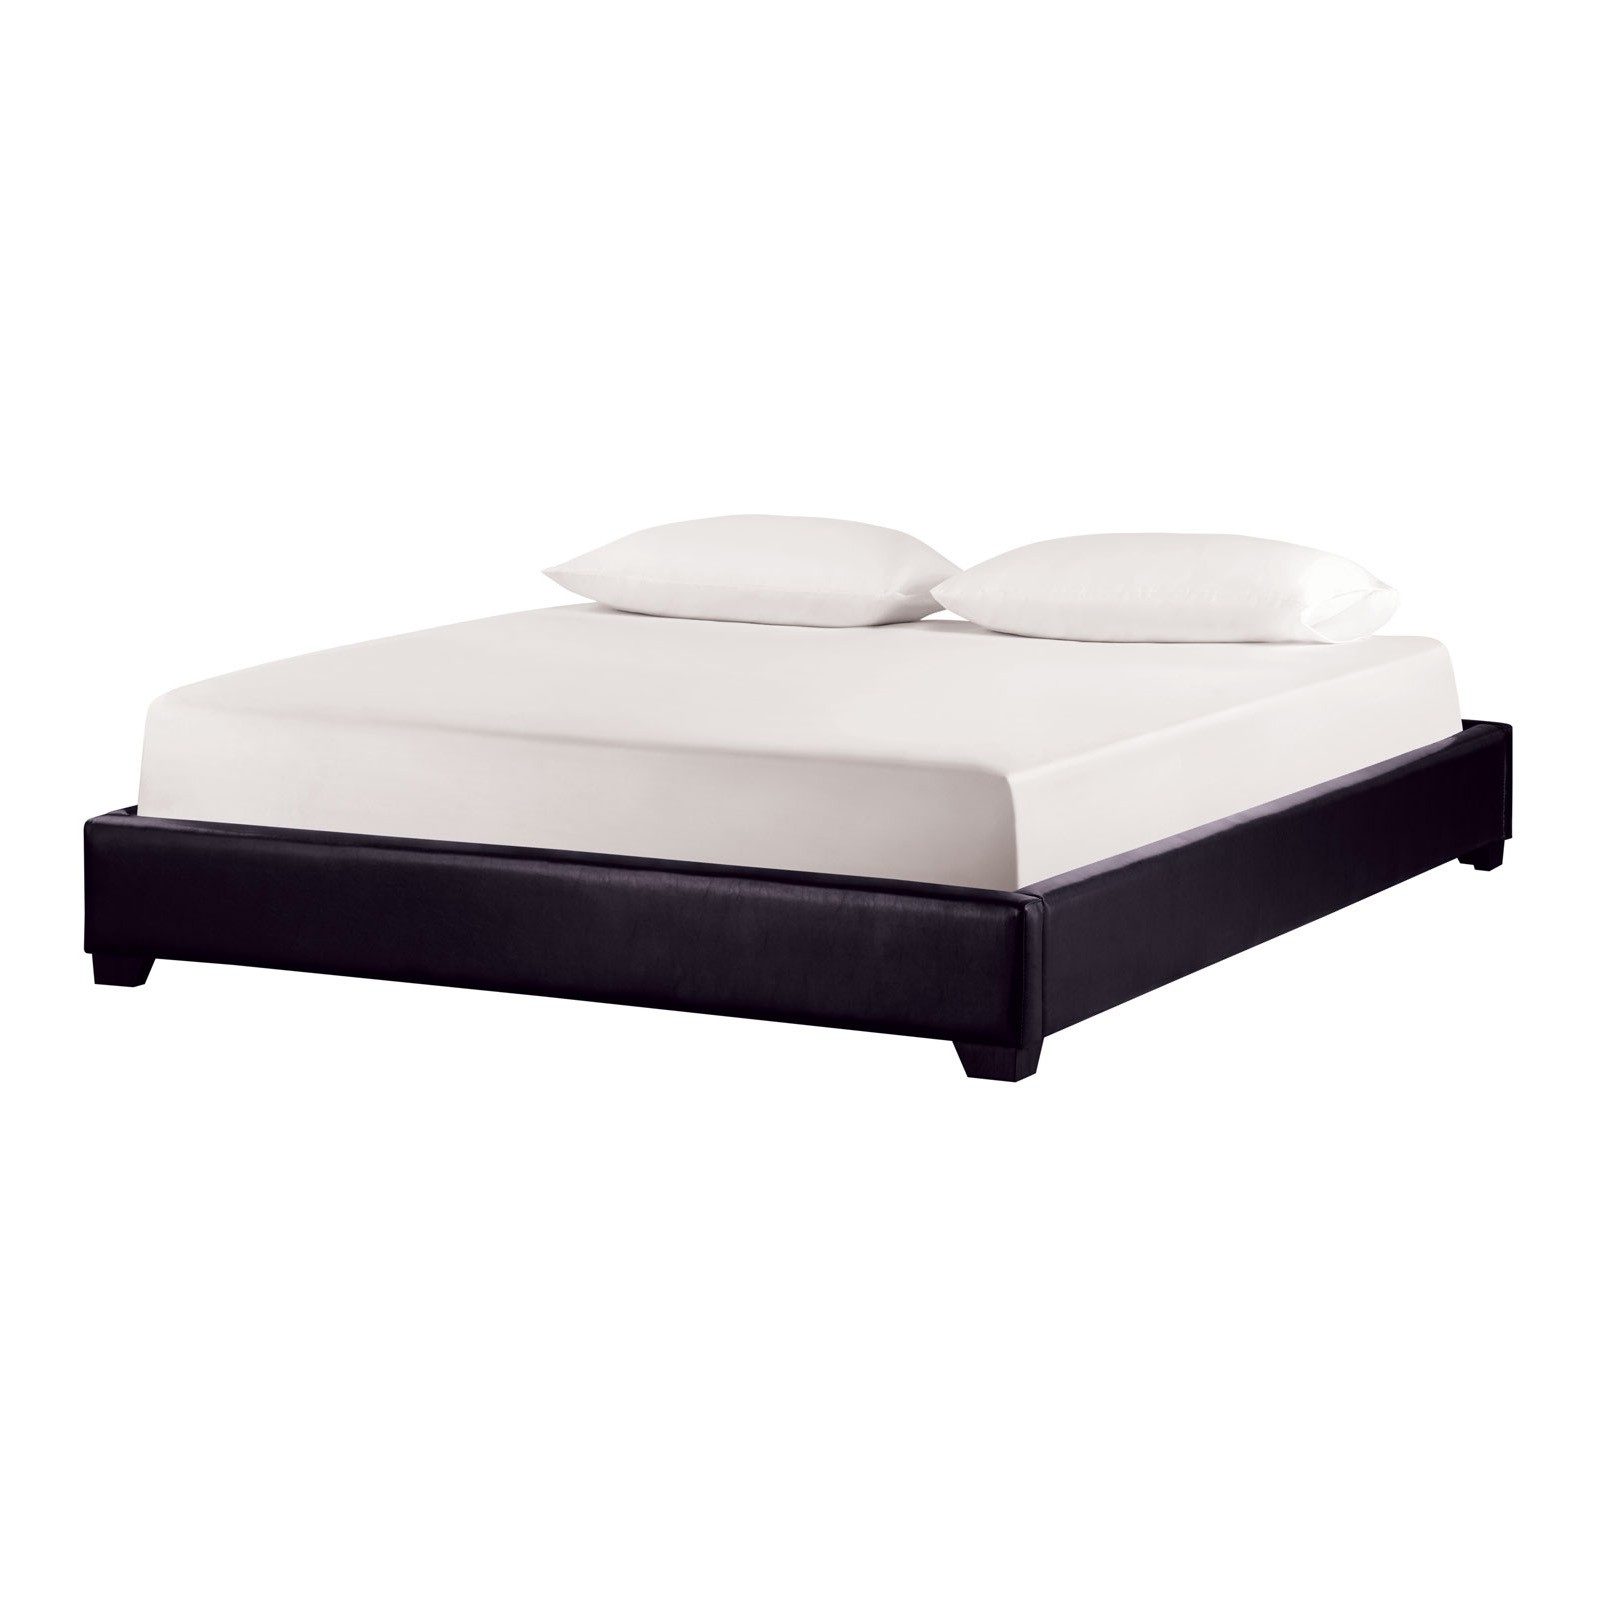 Low profile queen bed frame 36